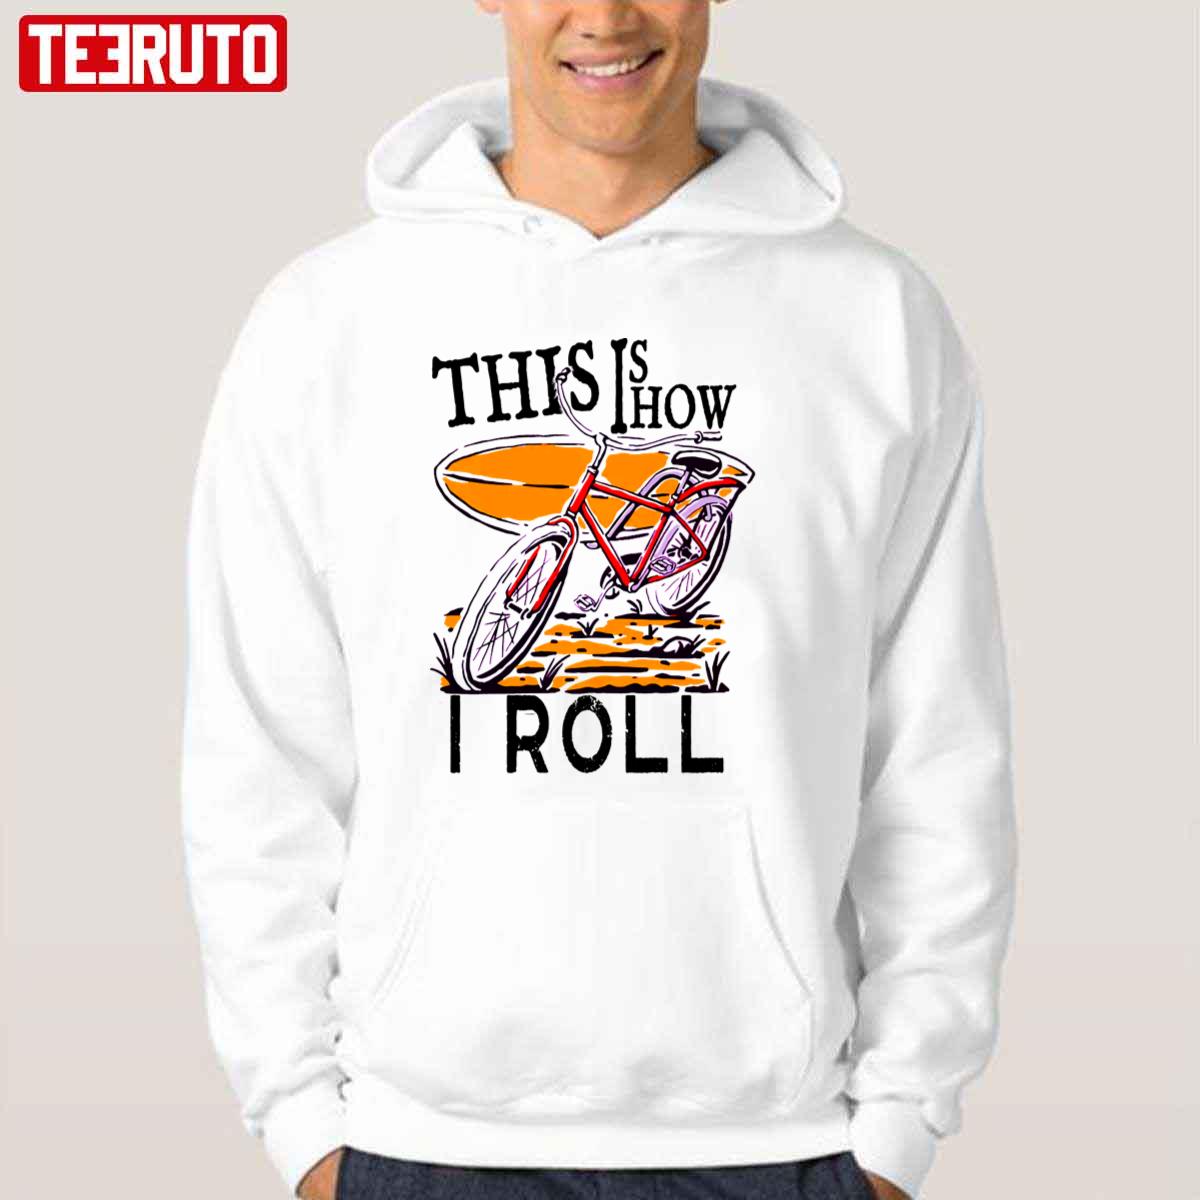 Vintage This Is How I Roll Unisex T-Shirt